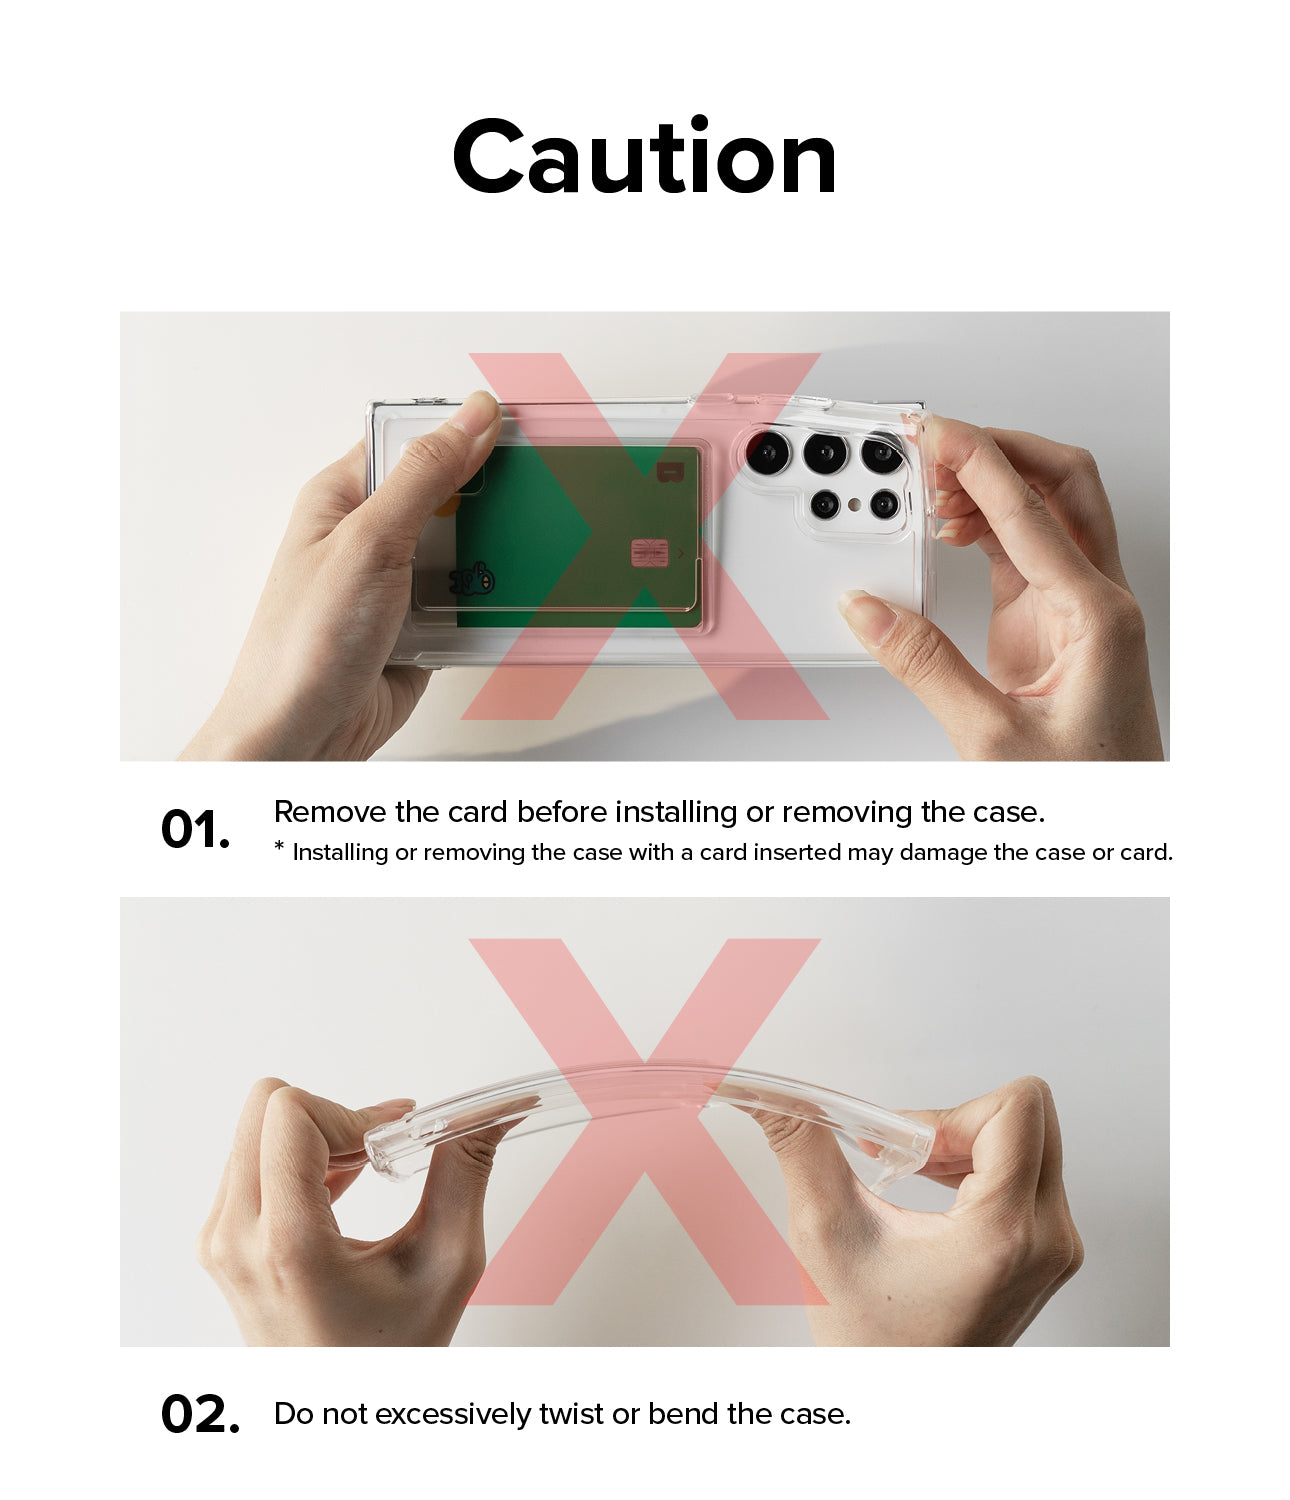 Caution l 01. Remove the card before installing or removing the case. * Installing or removing the case with a card inserted may damage the case or card. 02. Do not excessively twist or bend the case.